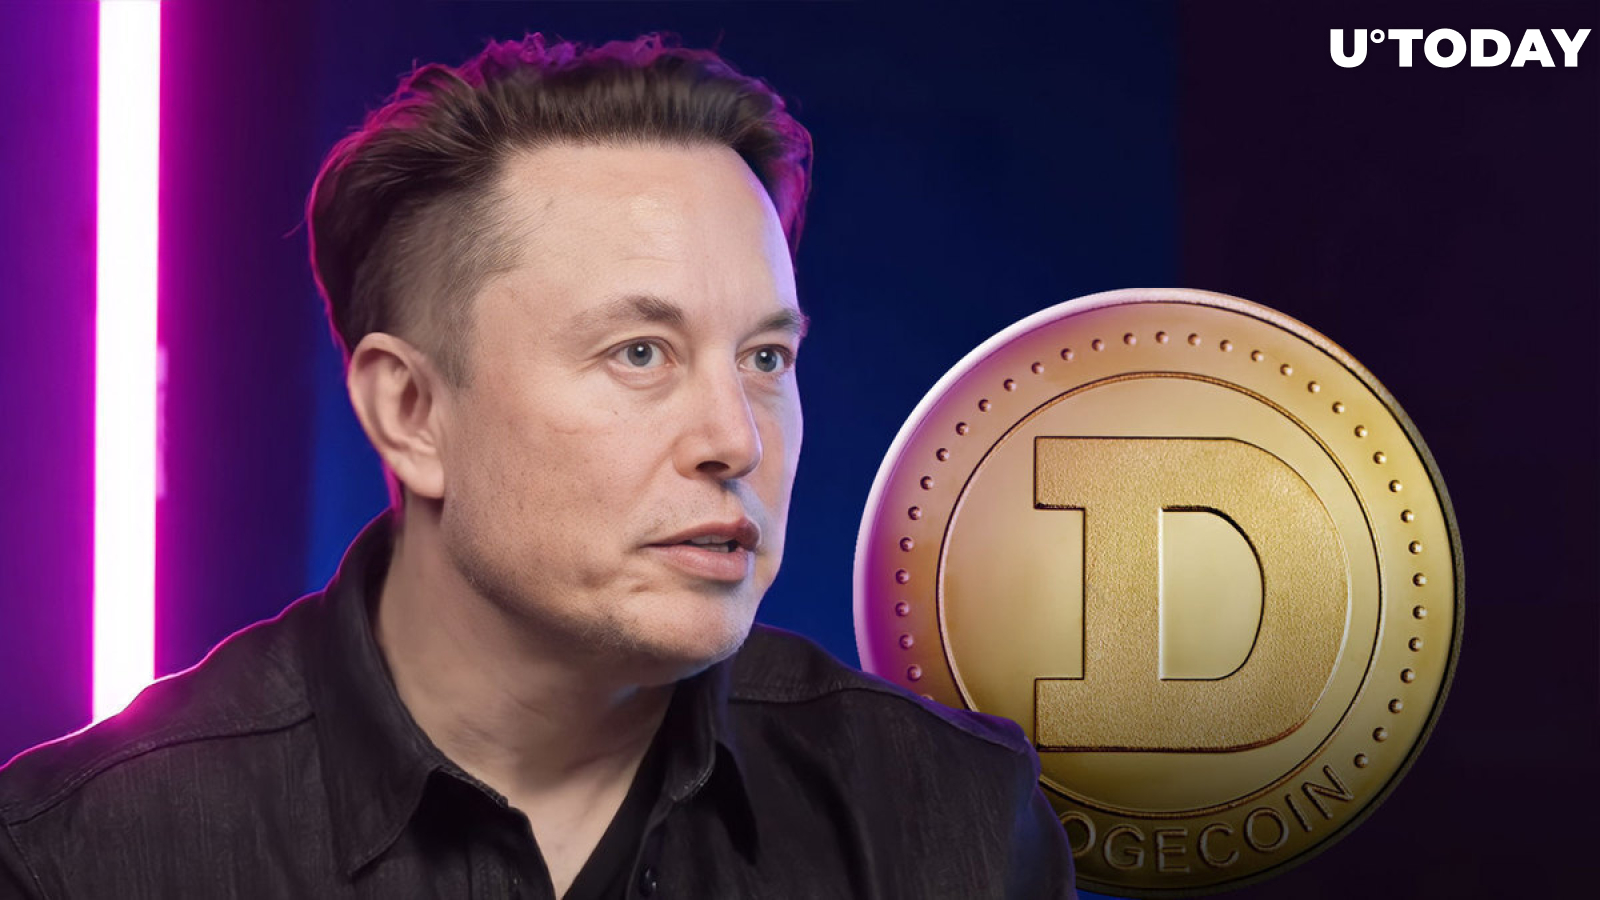 DOGE Price Skyrockets as Musk Breaks Silence on Dogecoin for Tesla Payments